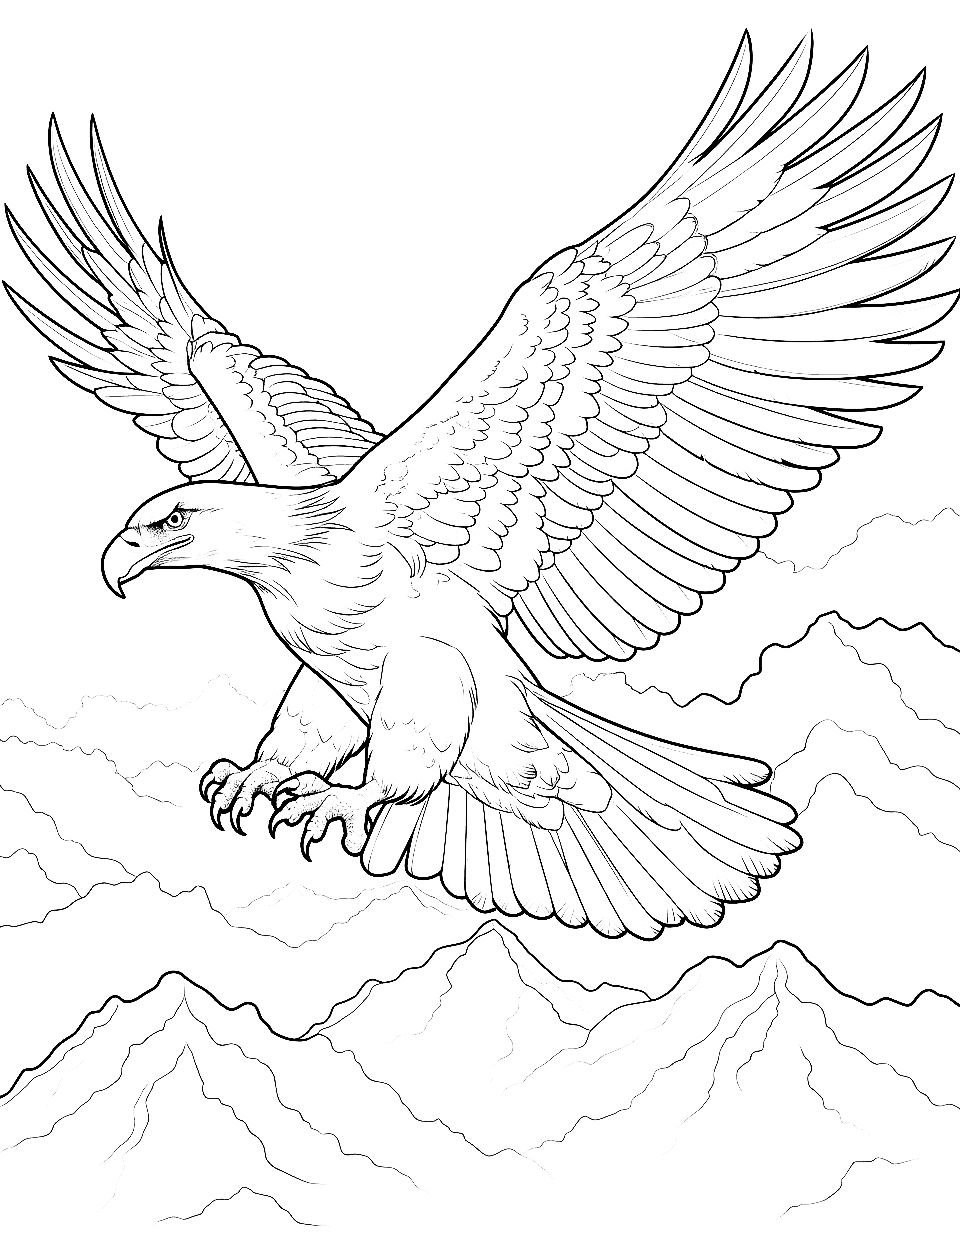 Eagle's Skyward Soar Adult Coloring Page - An eagle with wings spread wide, soaring against the sky.